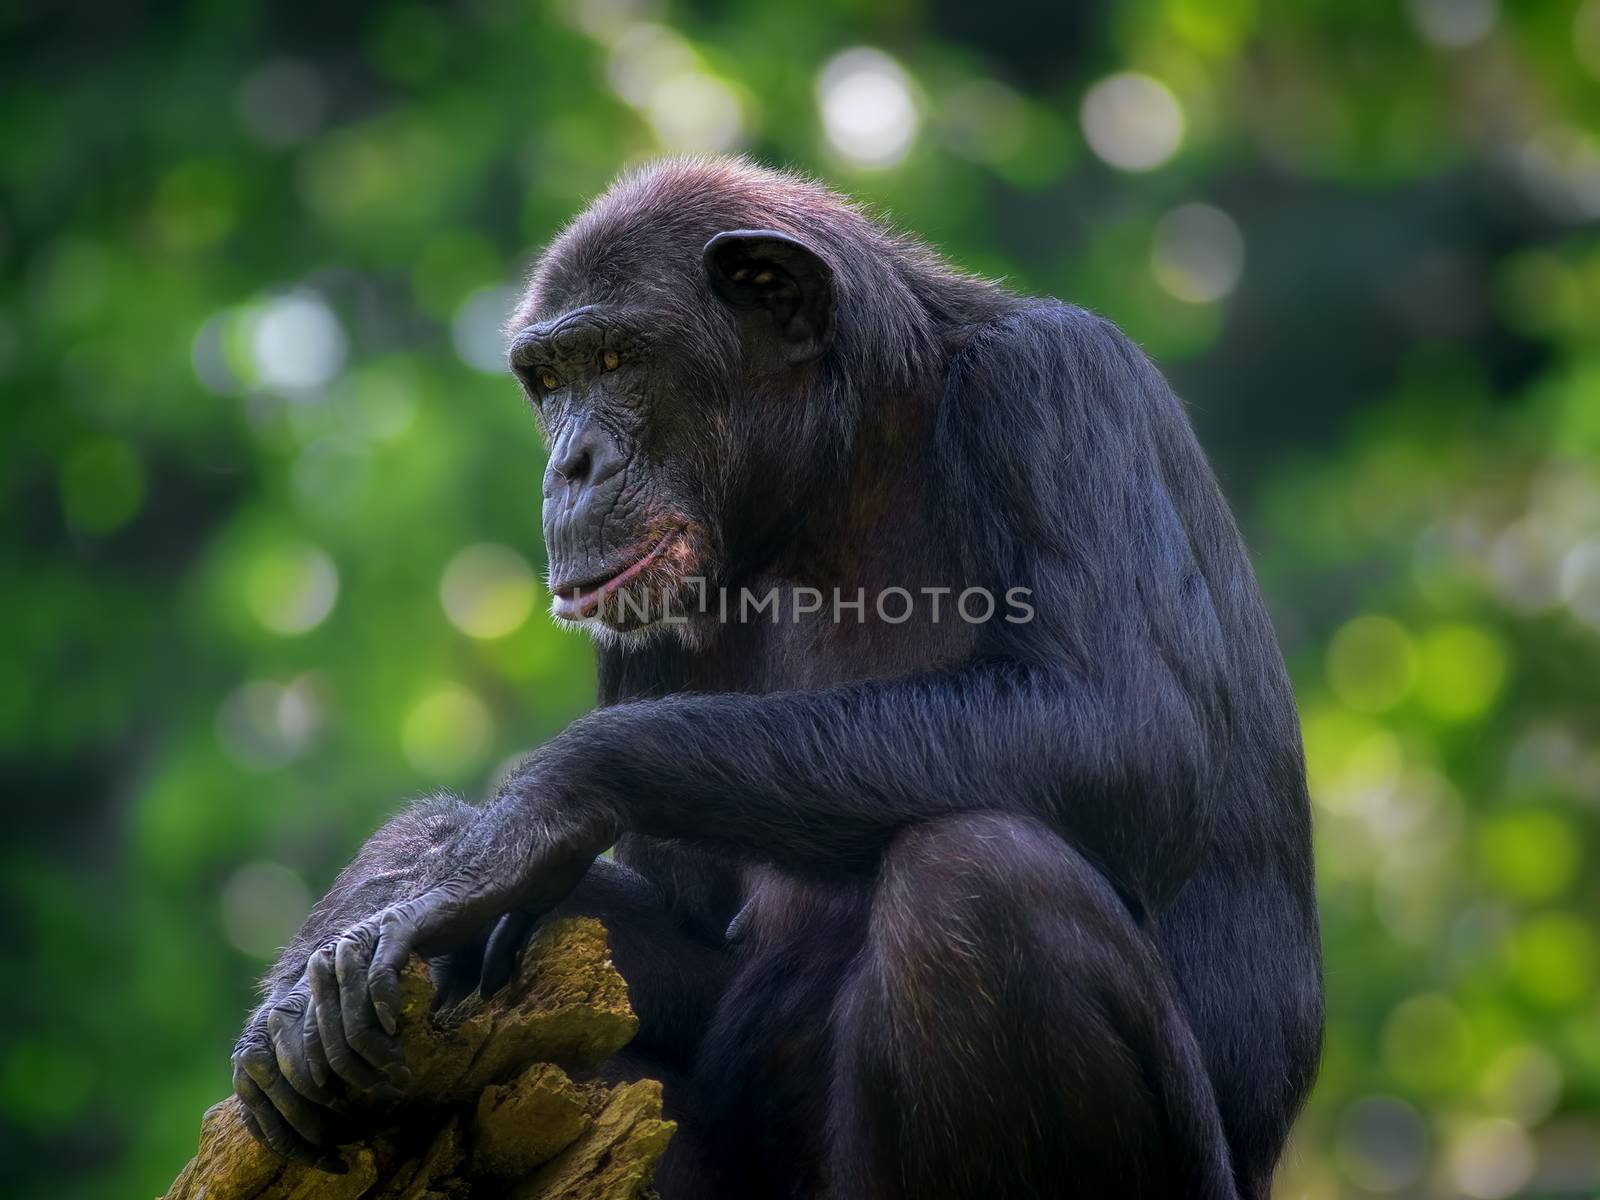 Common Chimpanzee sitting next to a river in the wild